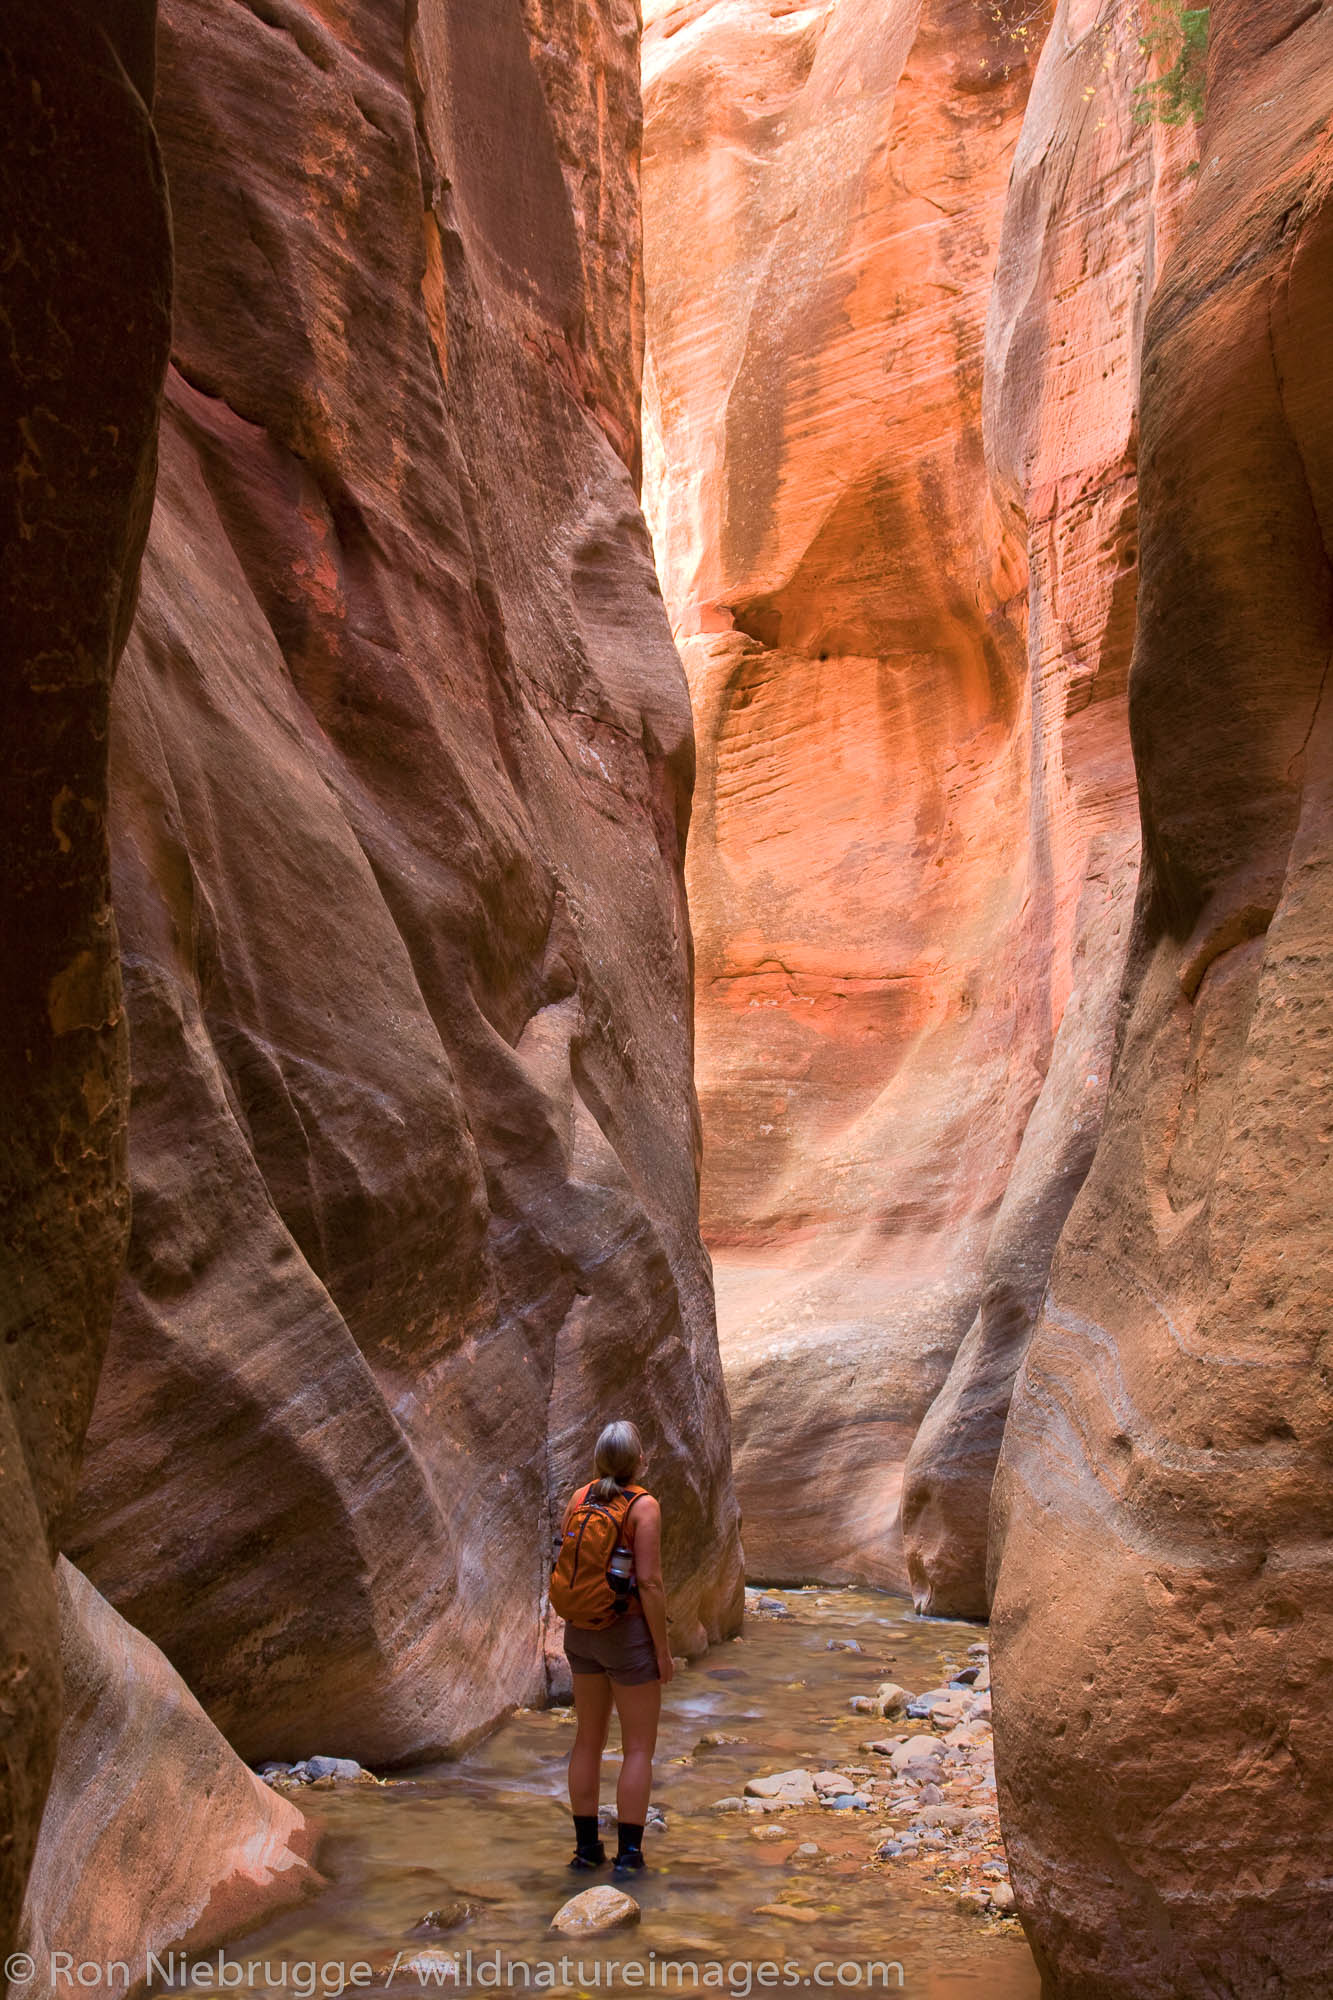 A hiker and a stream in a small canyon, Zion National Park, Utah.  (model released)